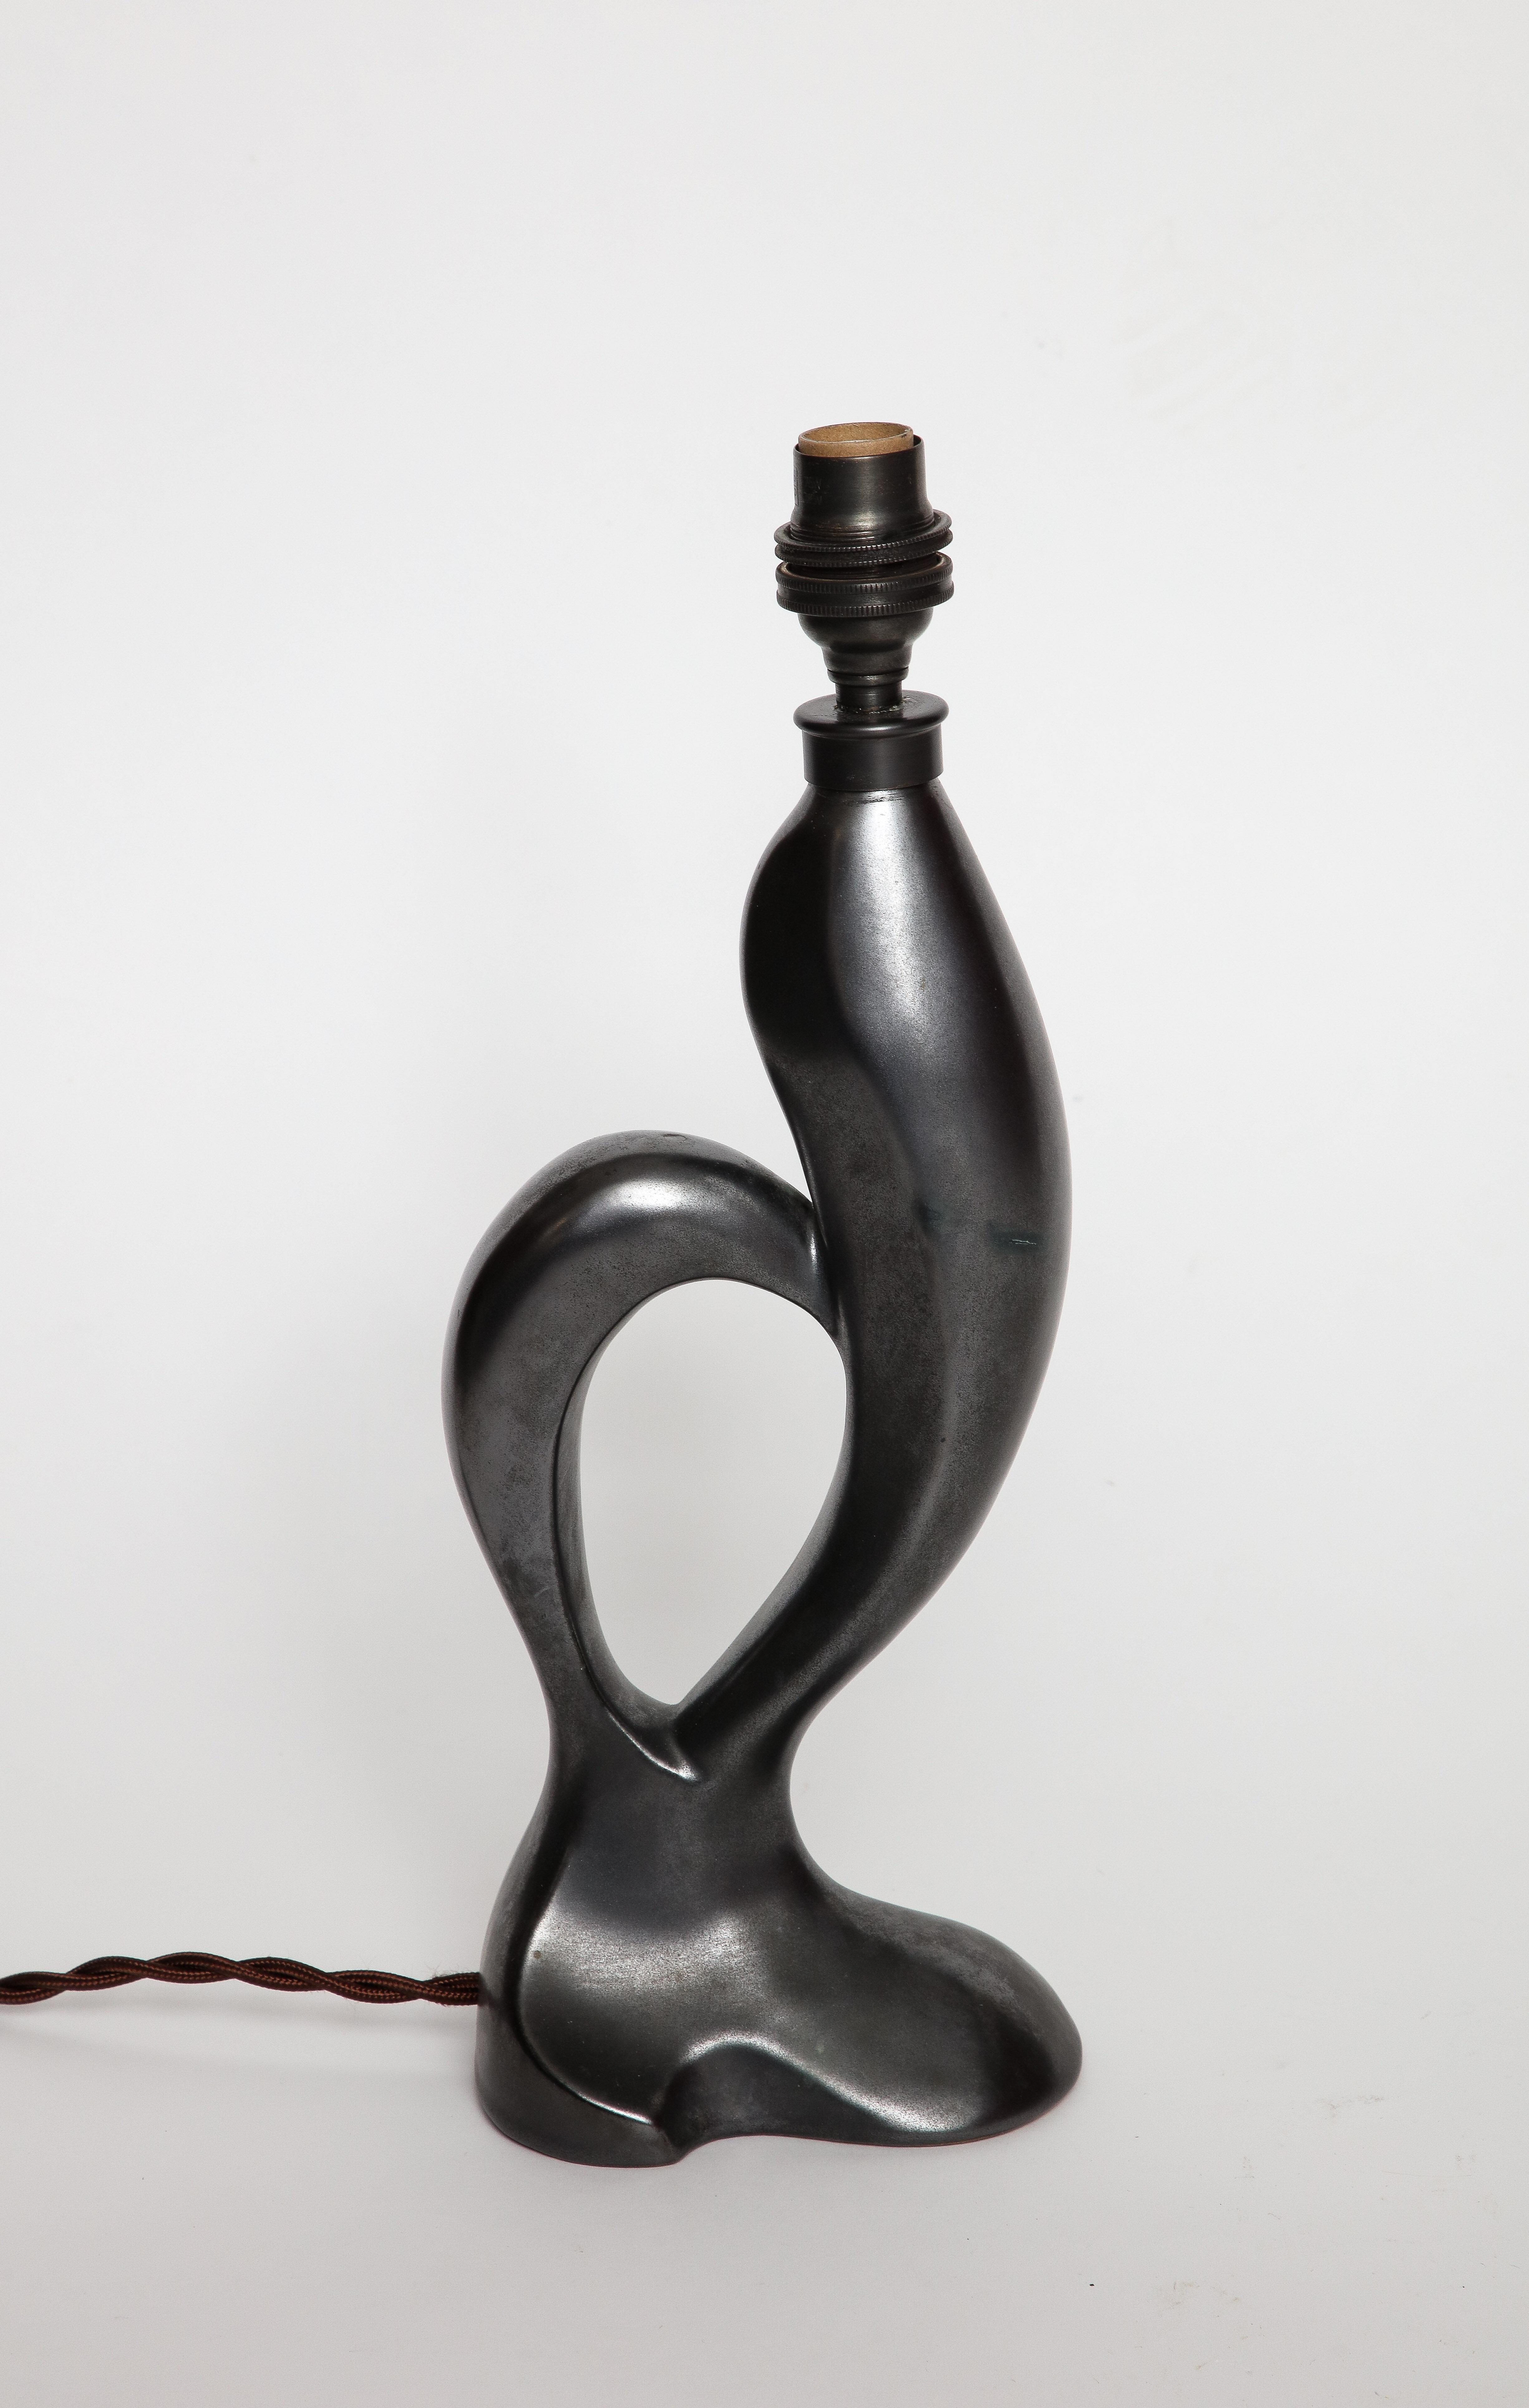 Zoomorphic French C.A.B. Lamp forming a Rooster, France, 1930-45, signed, numb. For Sale 3